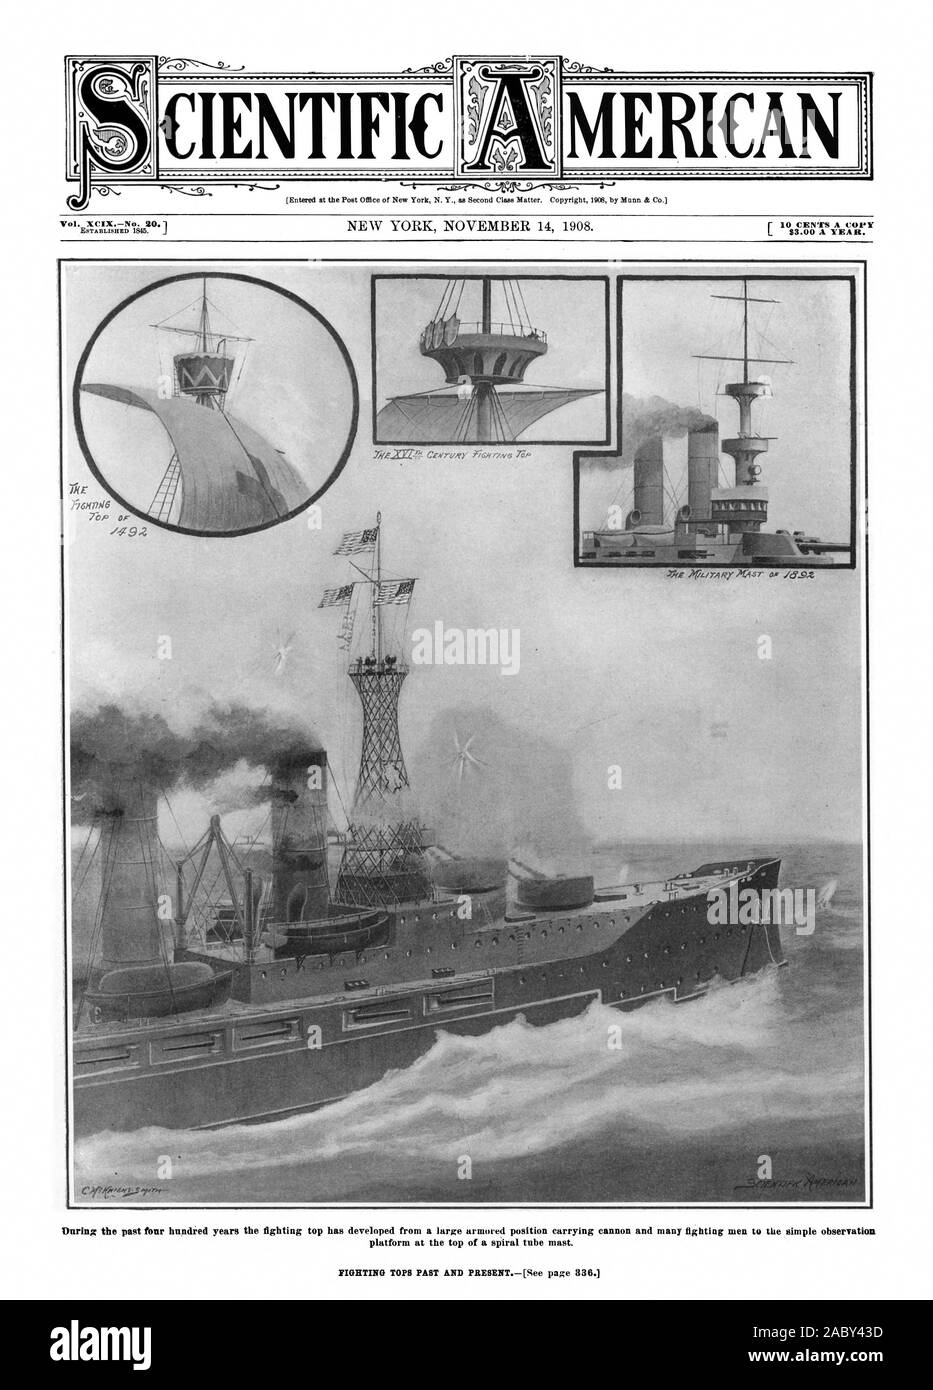 During the past four hundred years the fighting top has developed from a large armored position carrying cannon and many fighting men to the simple observation platform at the top of a spiral tube mast. MERICAN, scientific american, 1908-11-14 Stock Photo